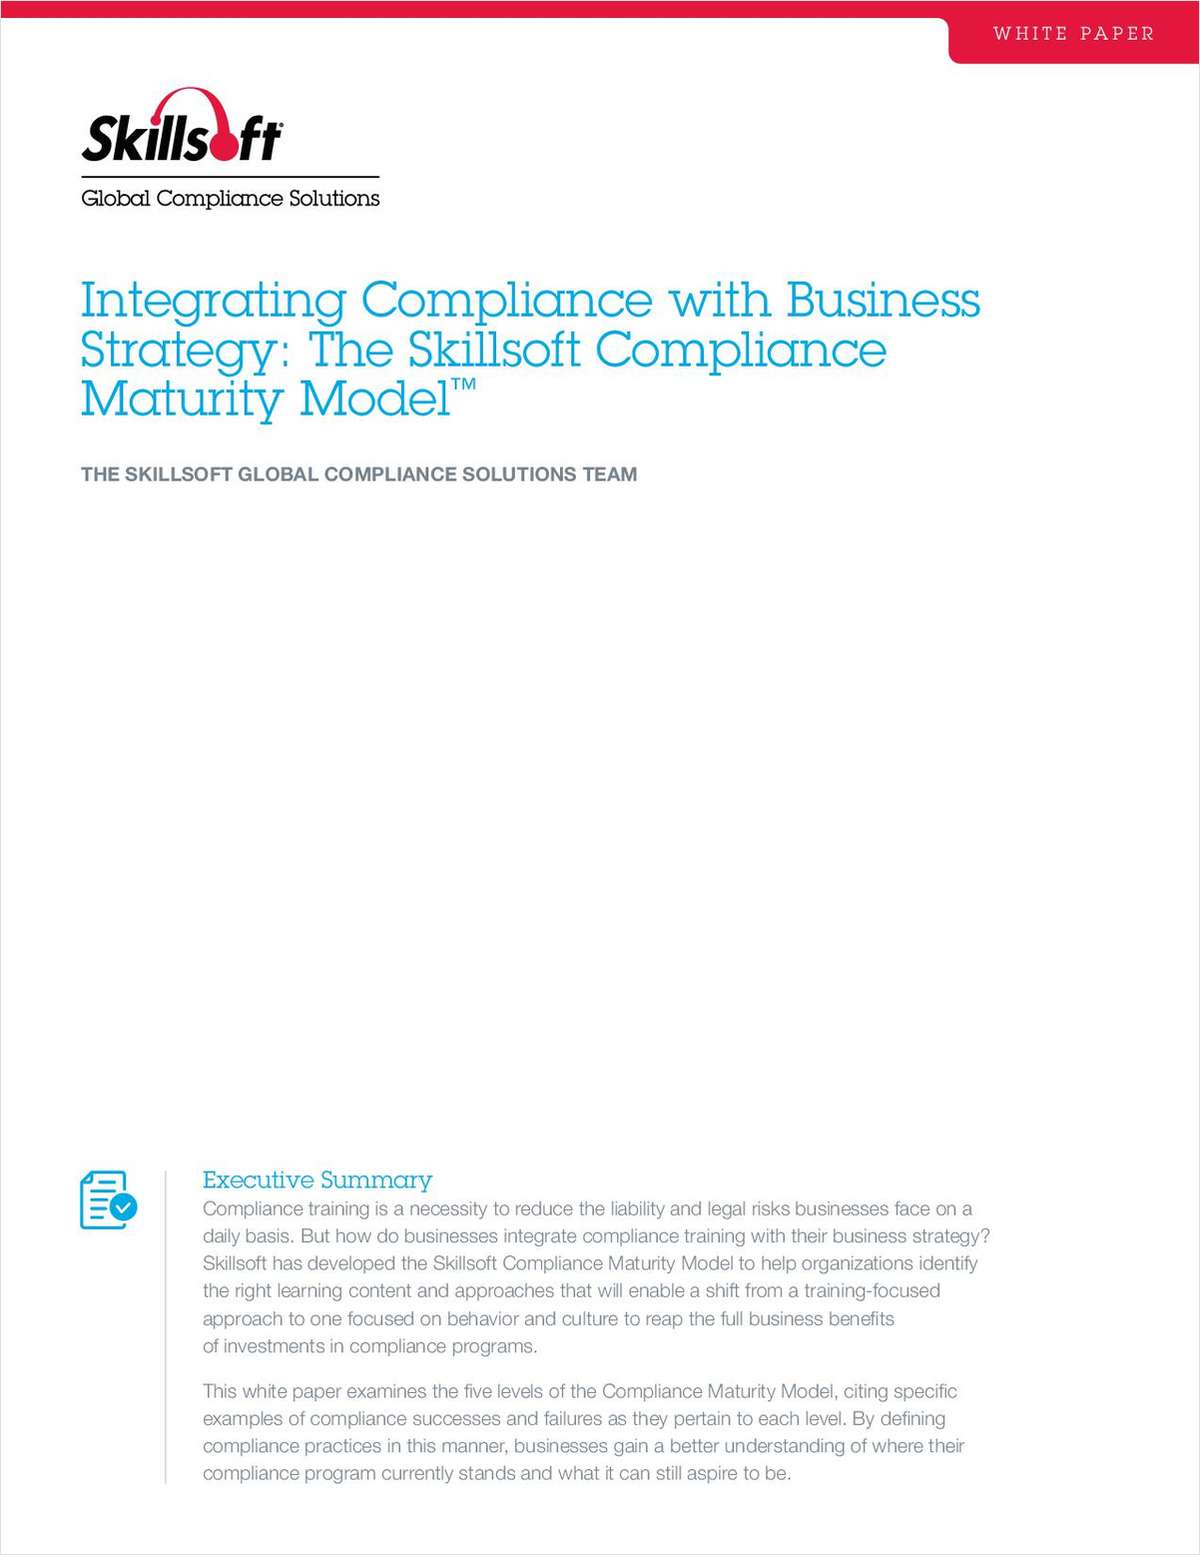 Integrating Compliance with Business Strategy